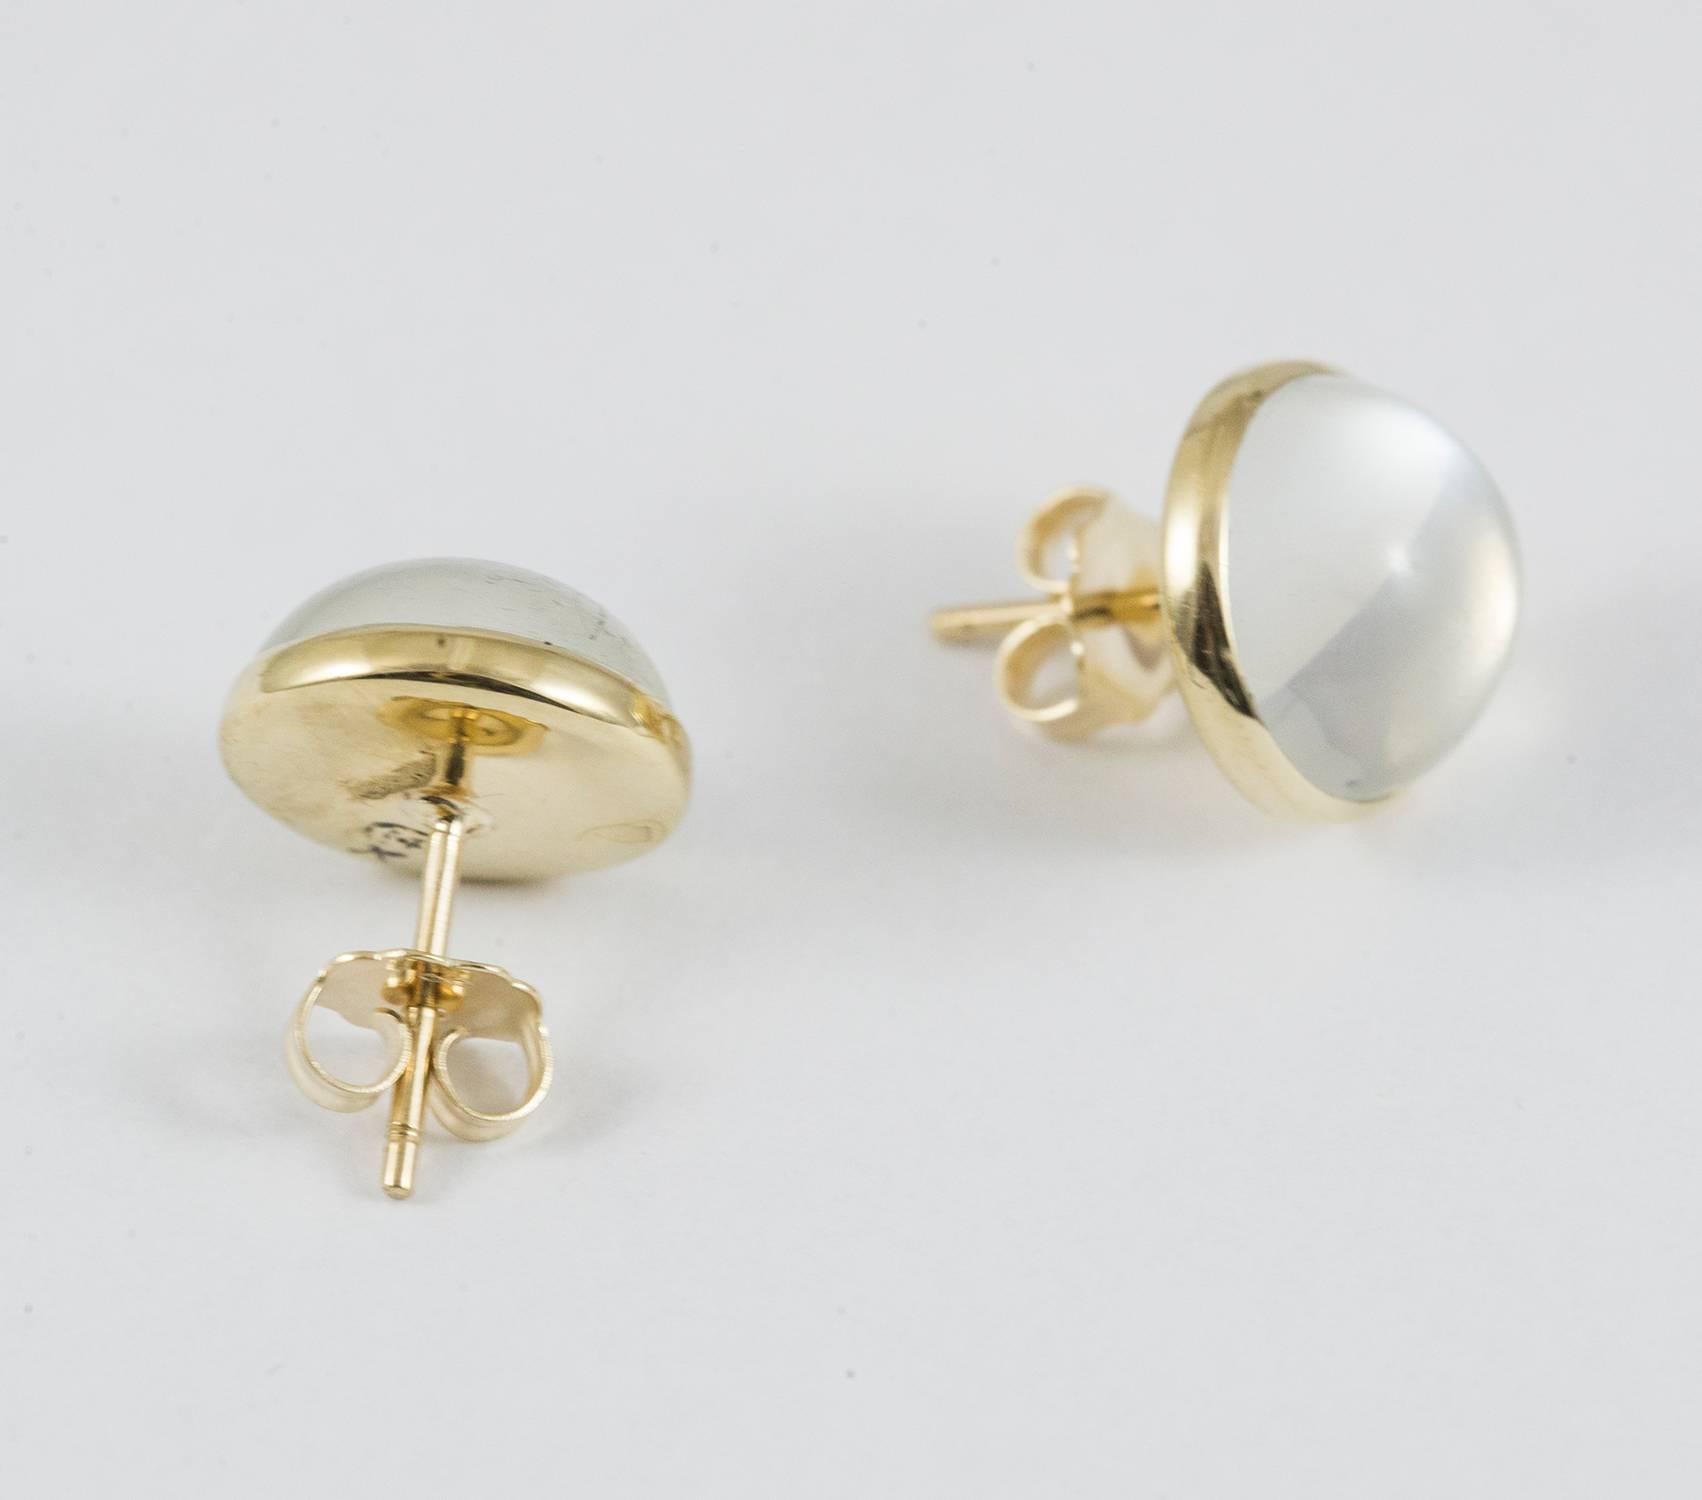 A luminous pair of vintage cabochon moonstone earrings set in 14K yellow gold. These earrings are in excellent condition.